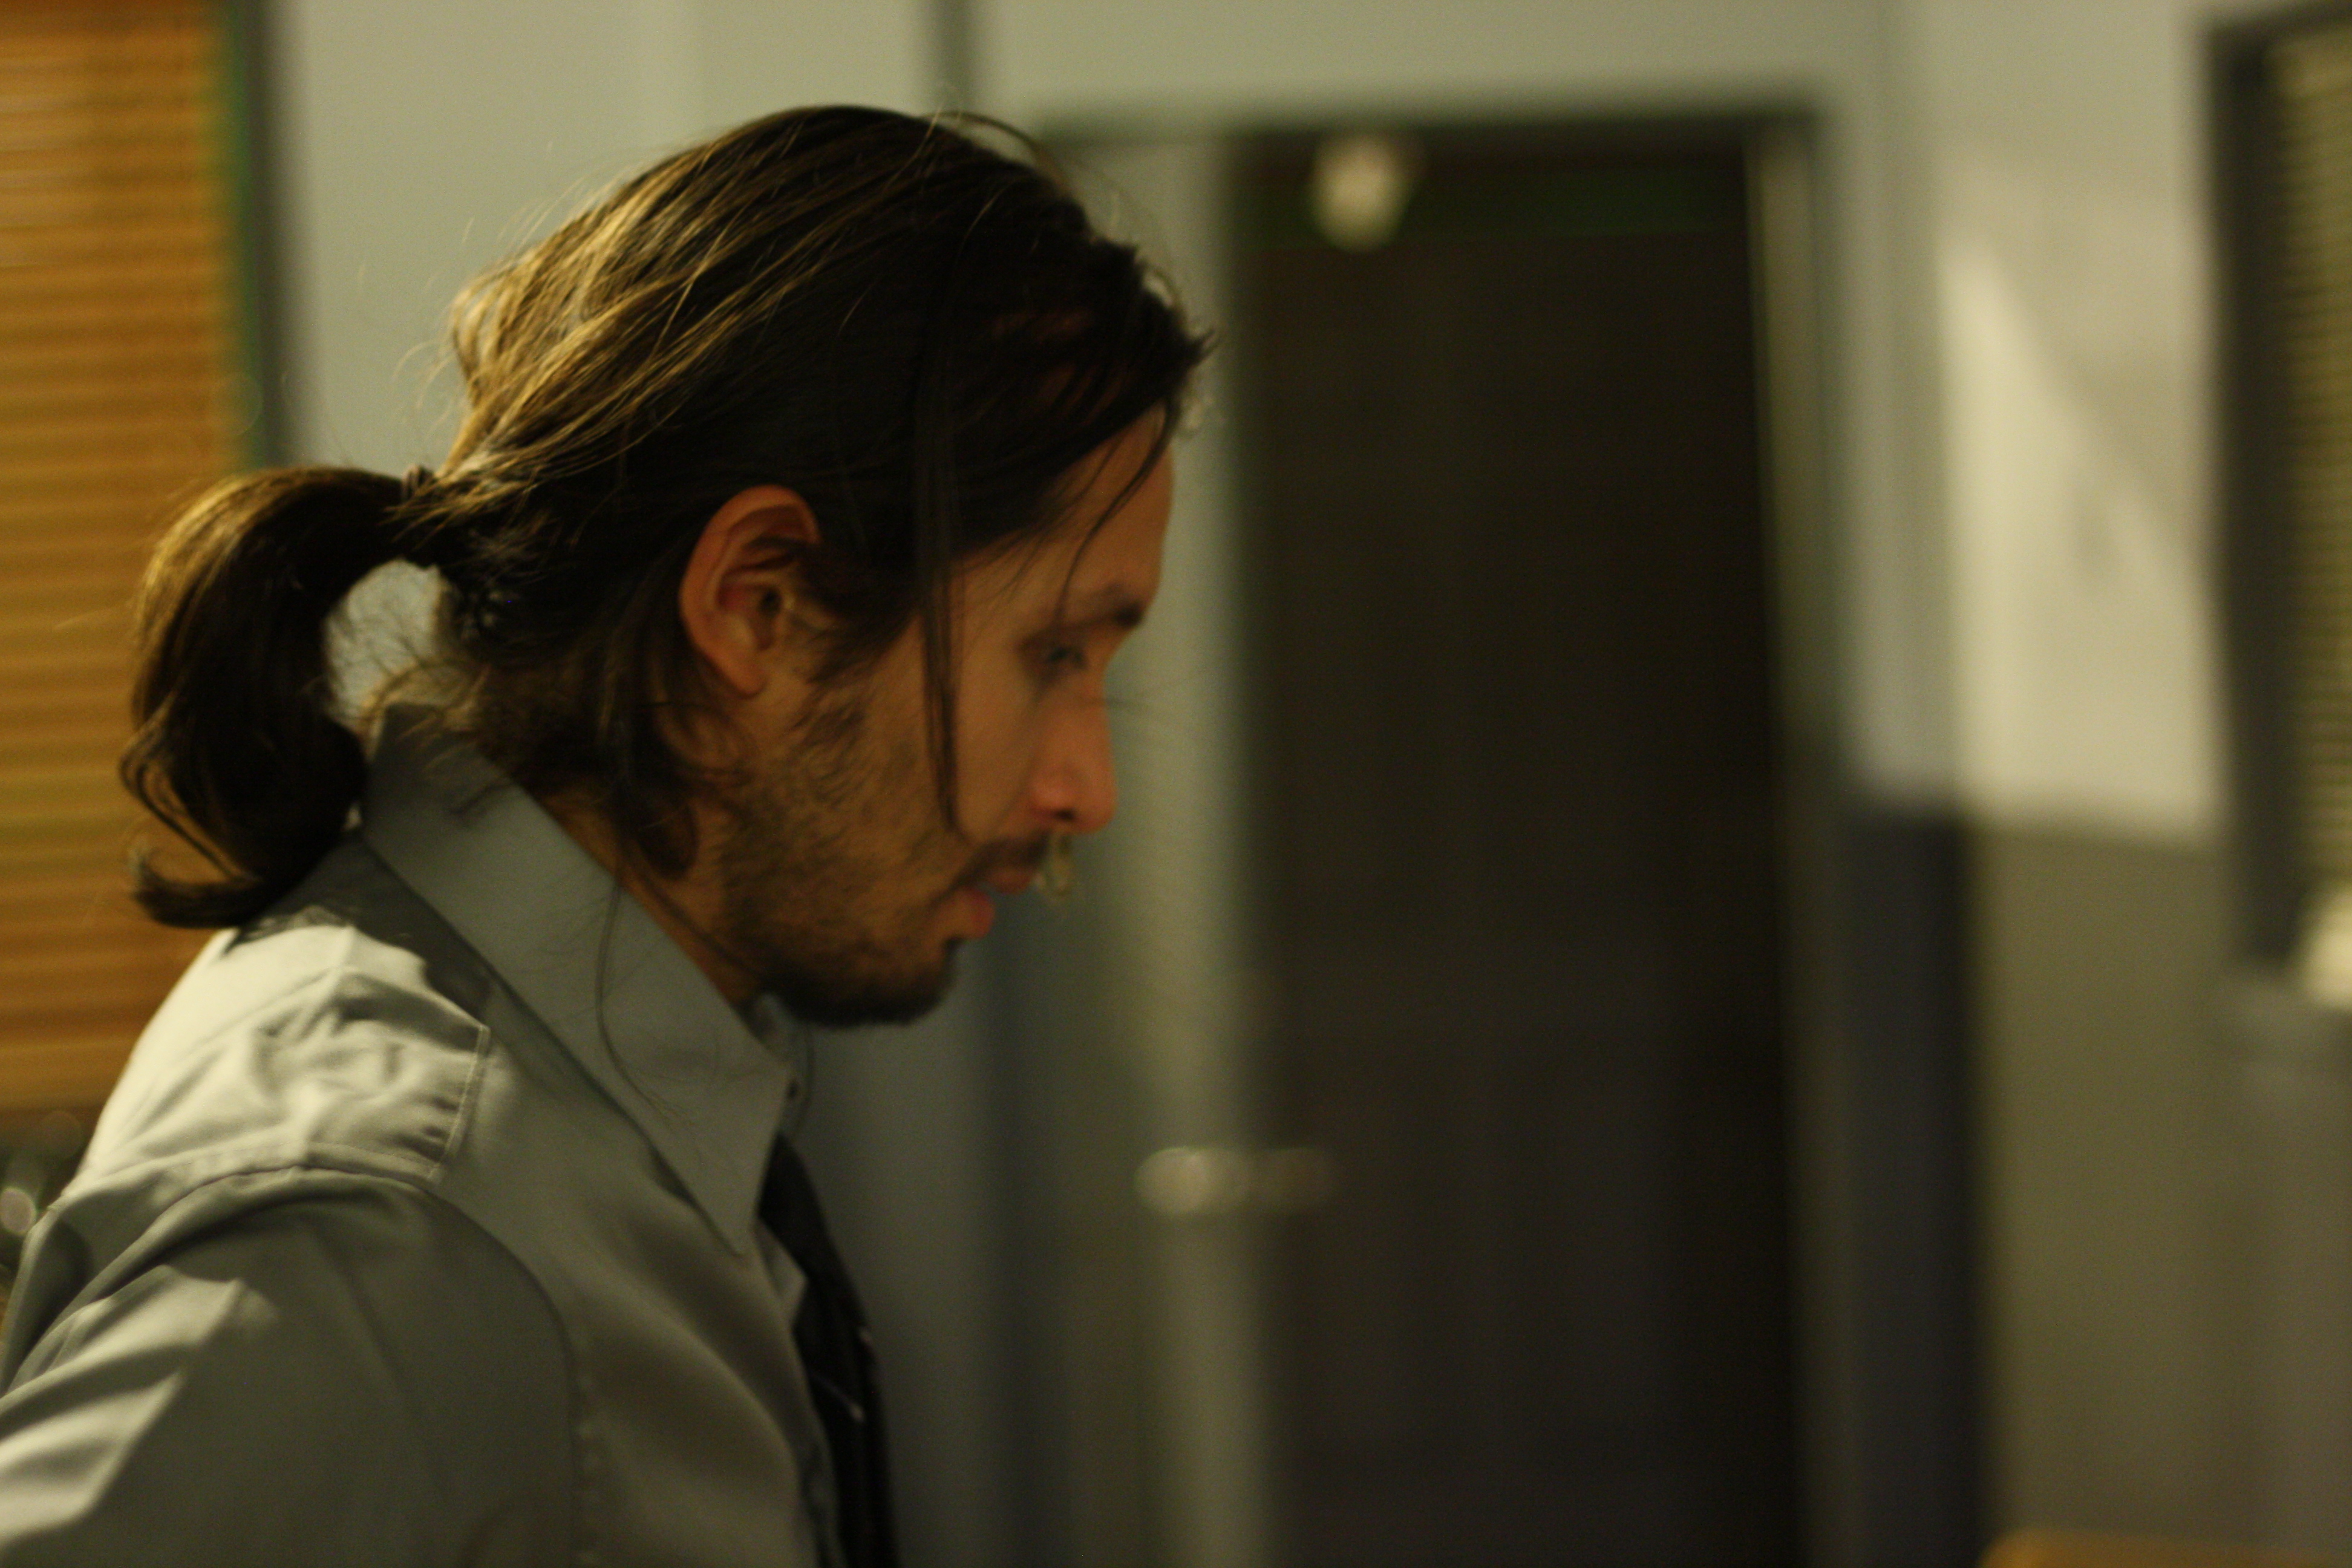 IMAGINATION OF YOUNG (FILM) WRITTEN AND DIRECTED BY: VINCENT SABELLA. CHARACTER: DETECTIVE PUGA LOS ANGELES.